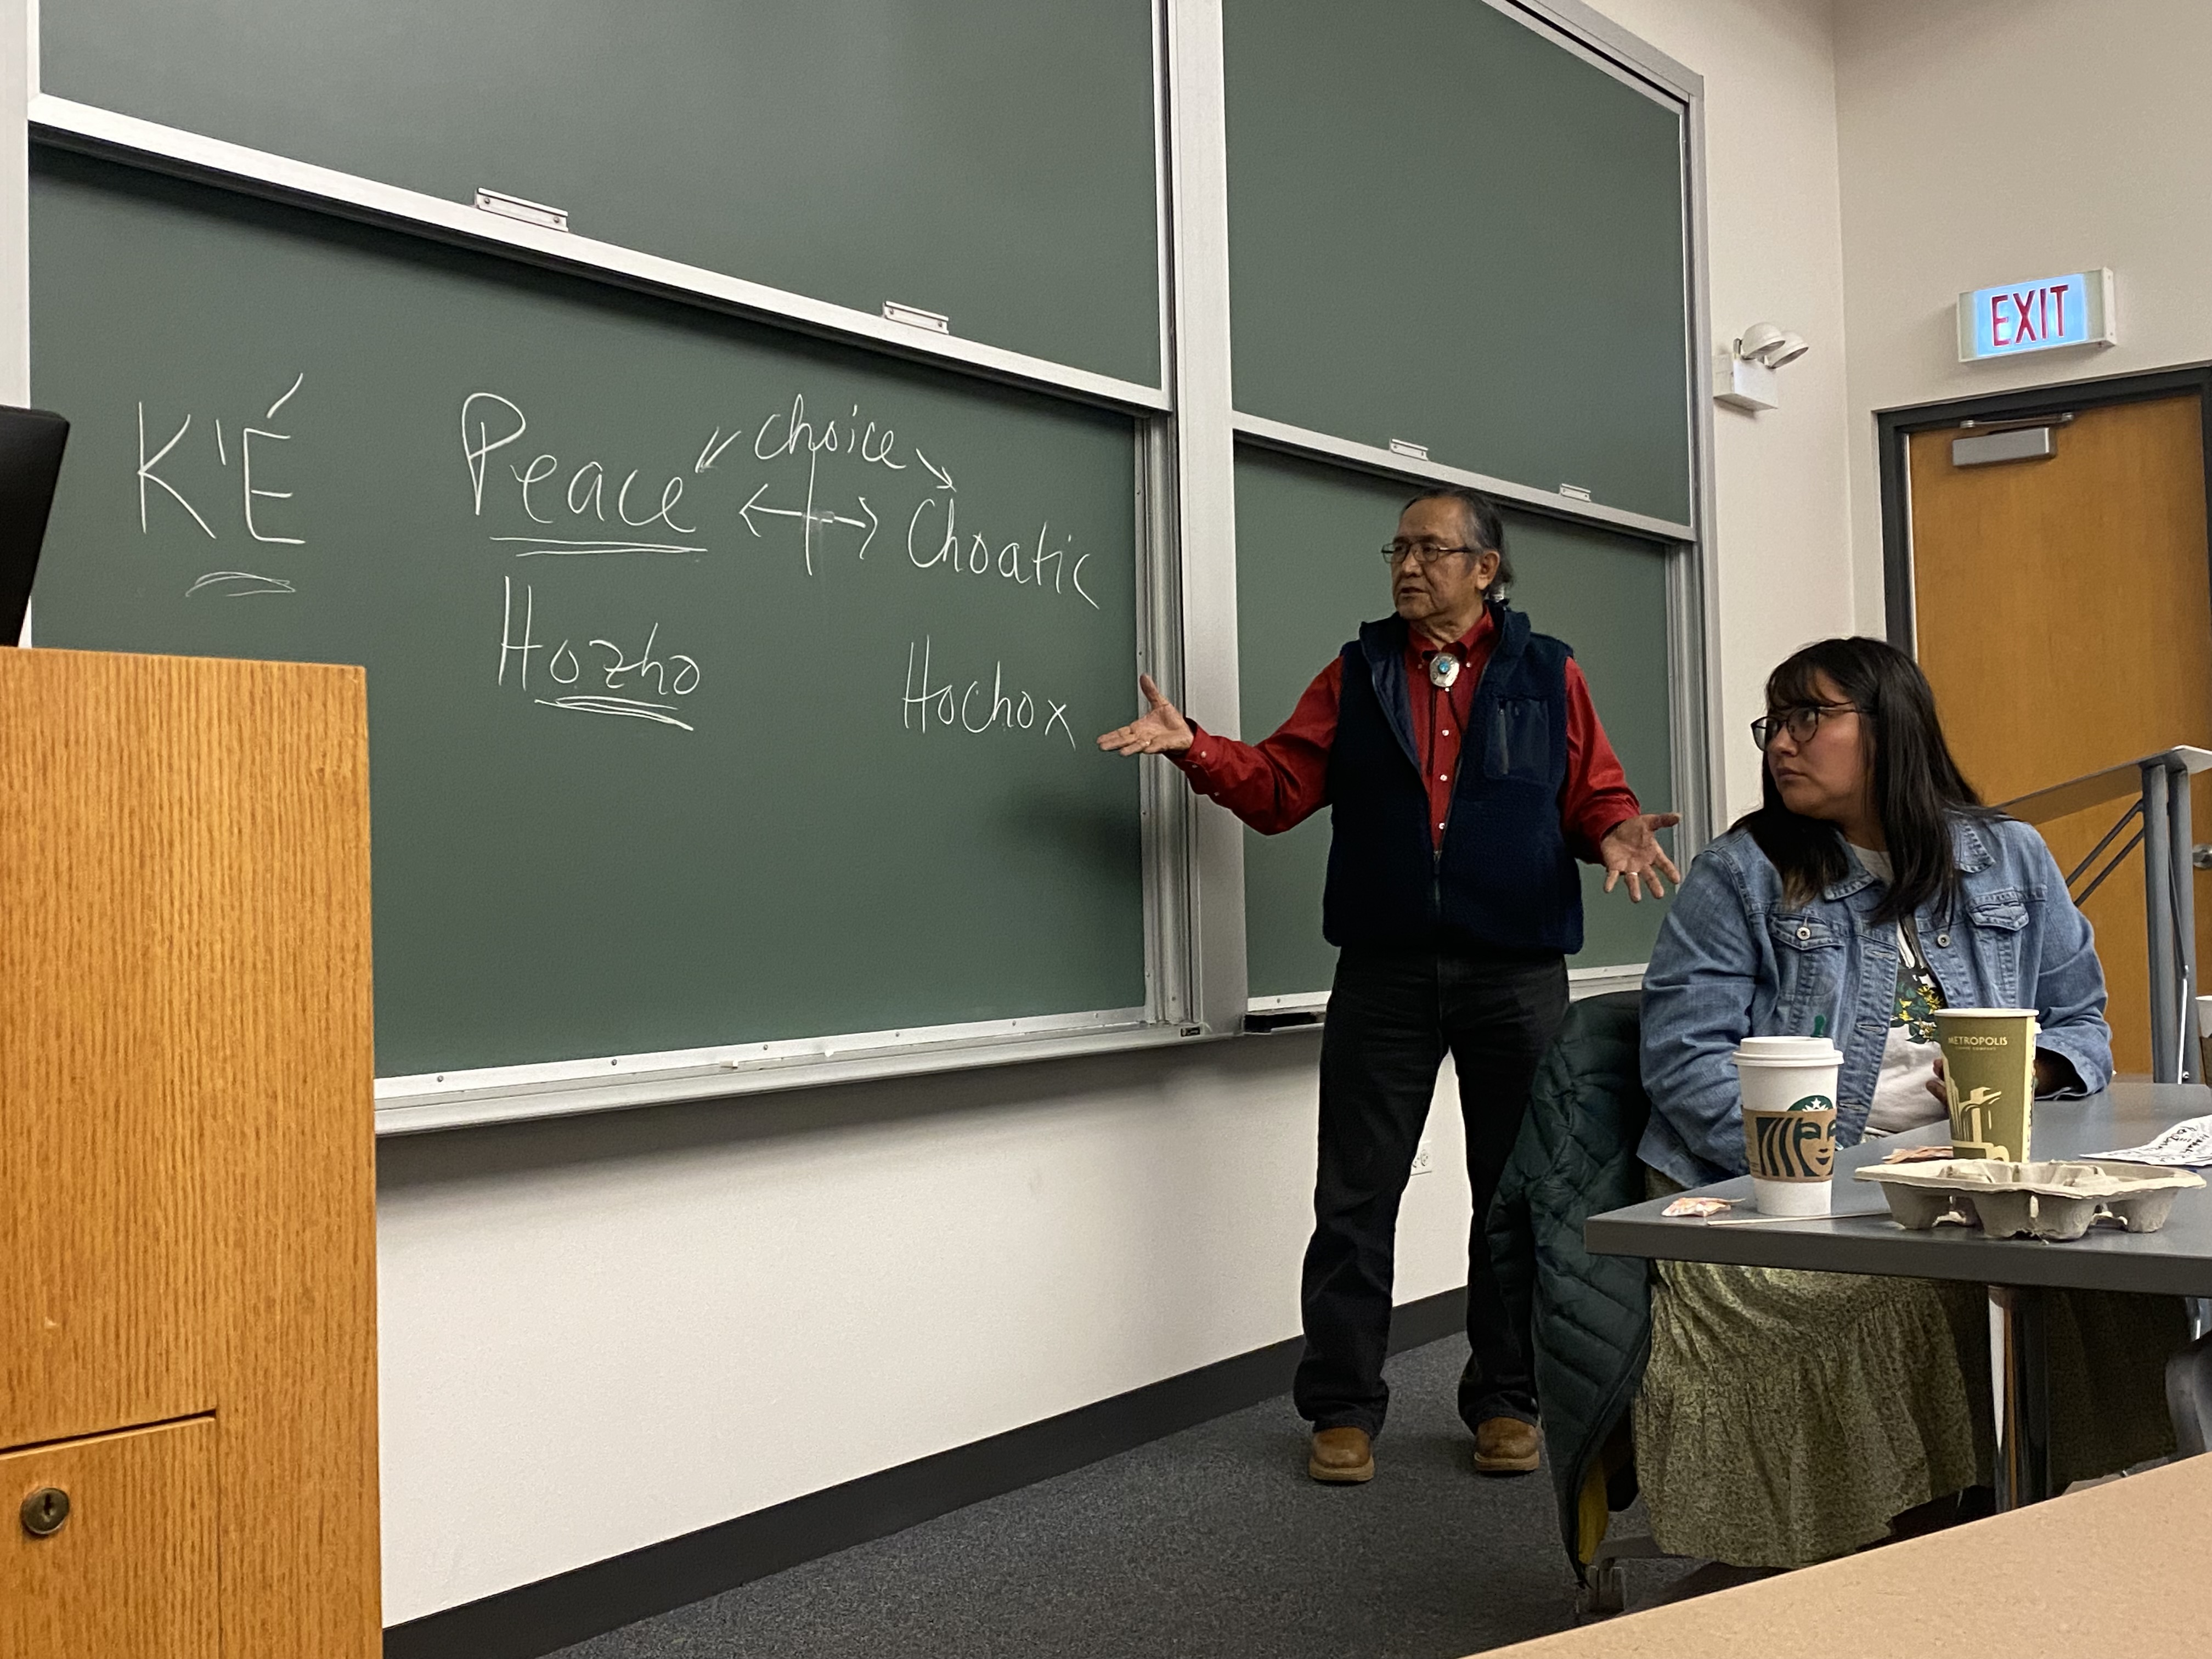 Robert Yazzie and Shandiin Yazzie giving a talk about indigenous perspectives on justice.